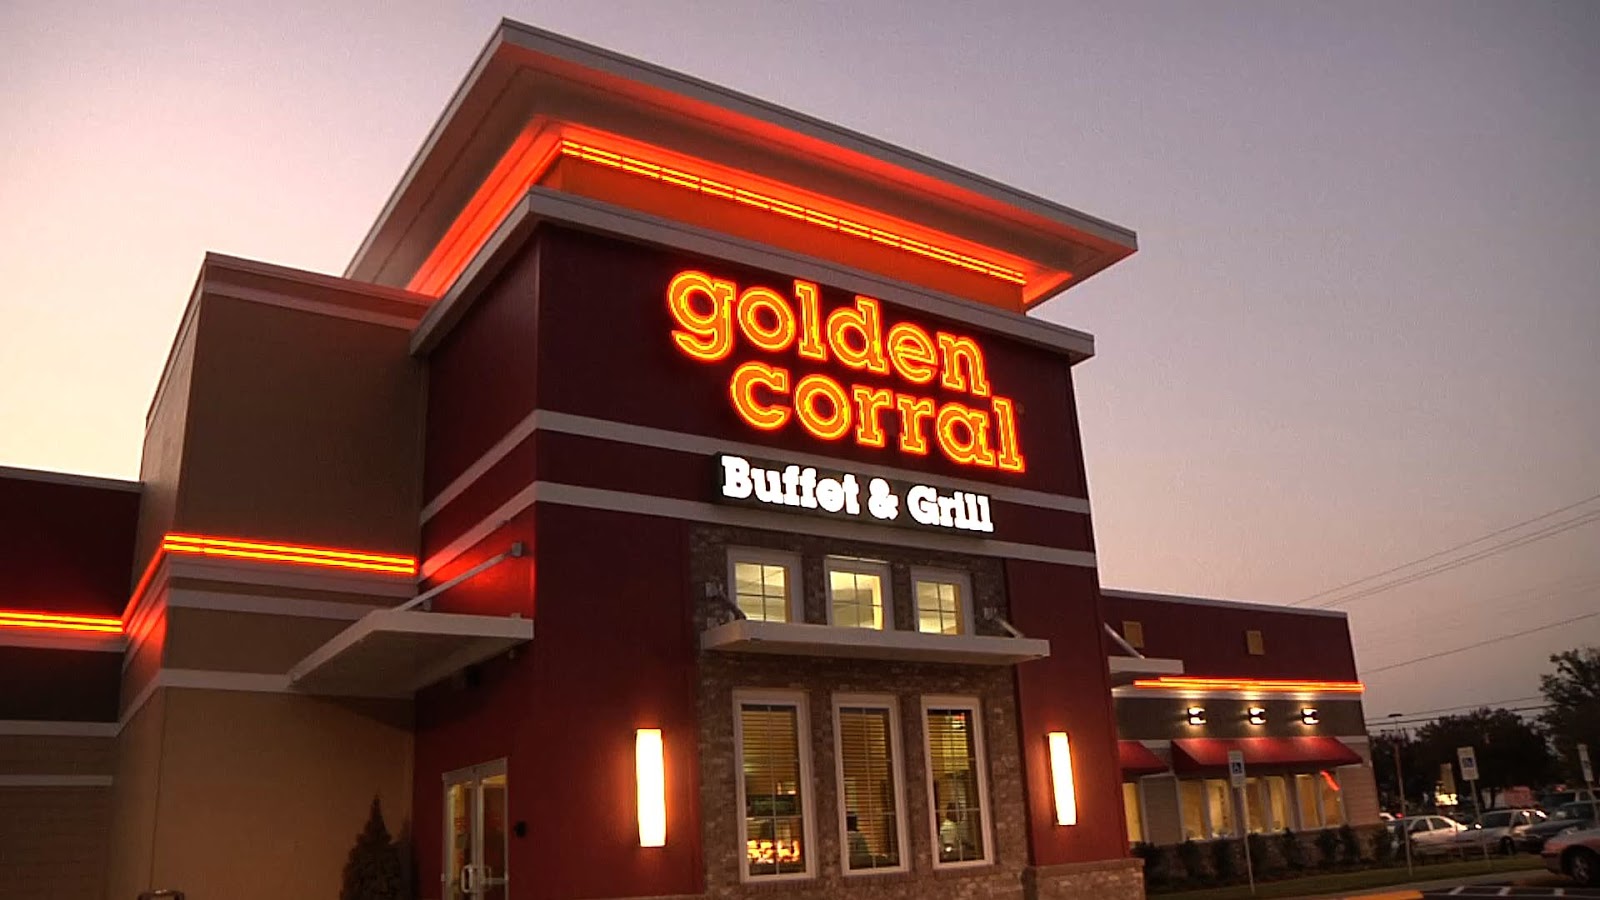 Golden Corral menu prices featuring 111 items ranging from $0.99 to $49.99